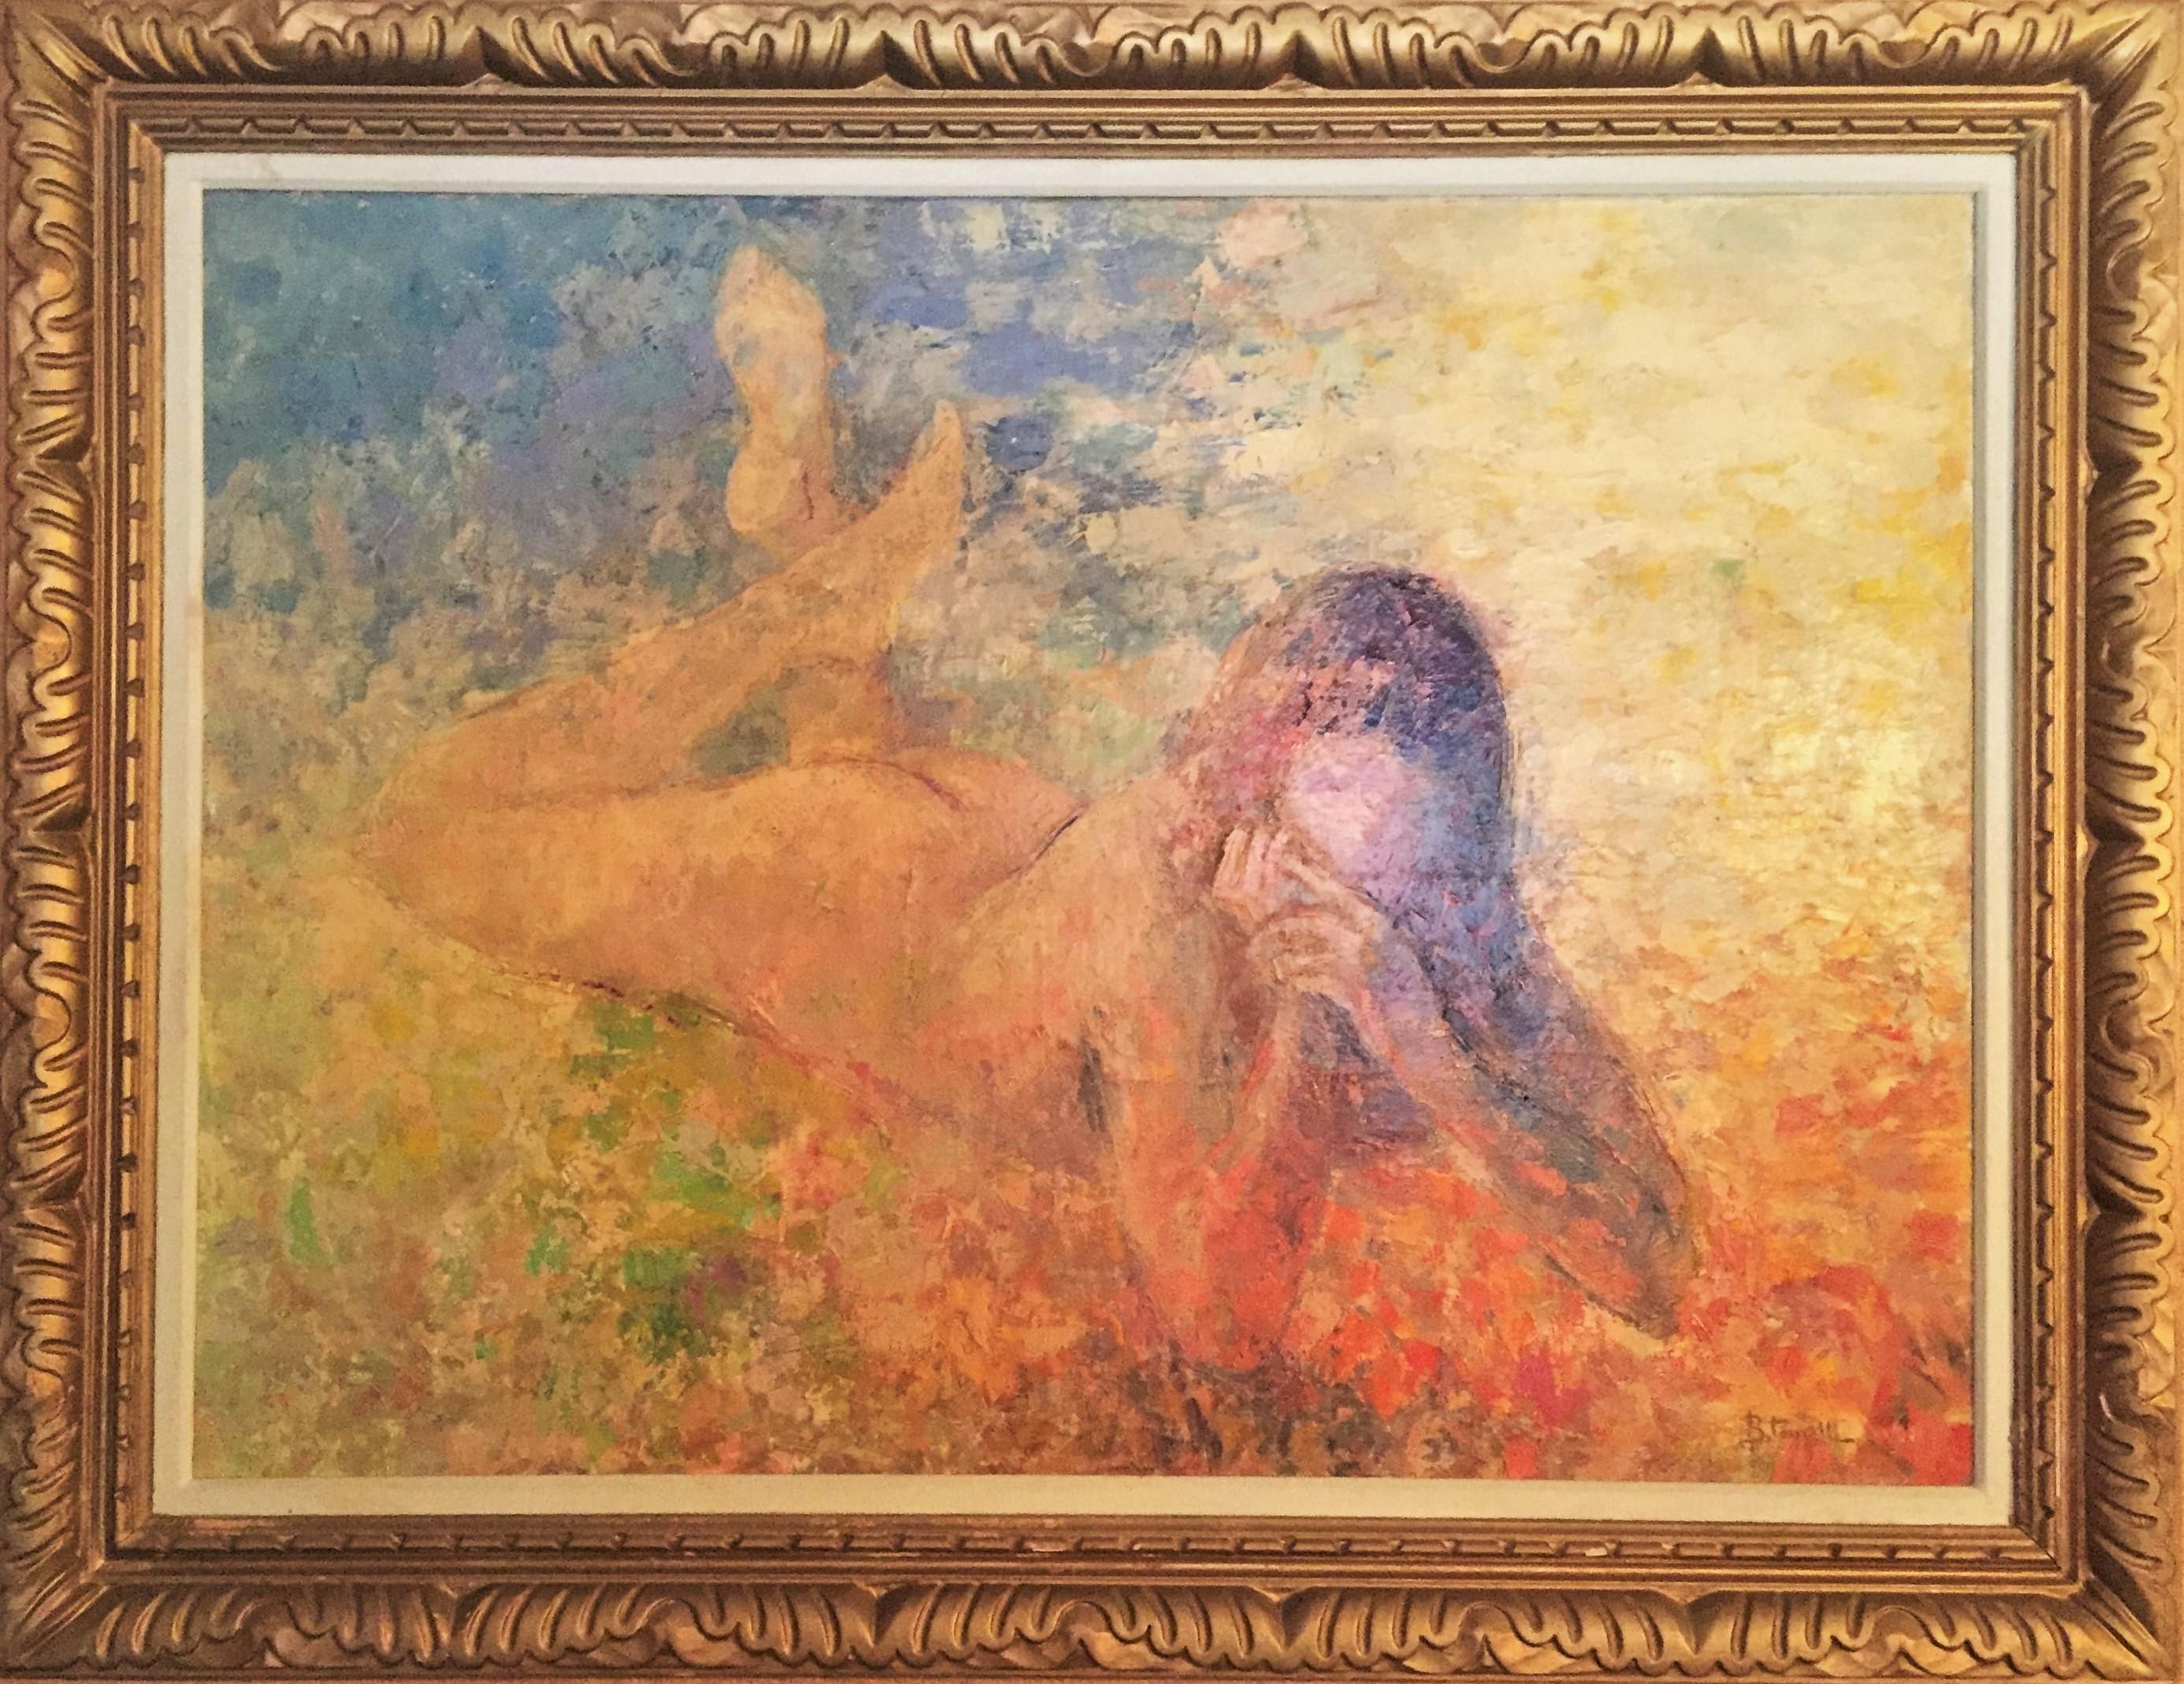 Signed lower right corner.
Stamped en verso Galerie Felix Vercel Paris - New York.
Original period frame.

Bernard Taurelle (French, B. 1931) is a famous French artist, widely known for his impressionistic paintings. He graduated college at 19 with